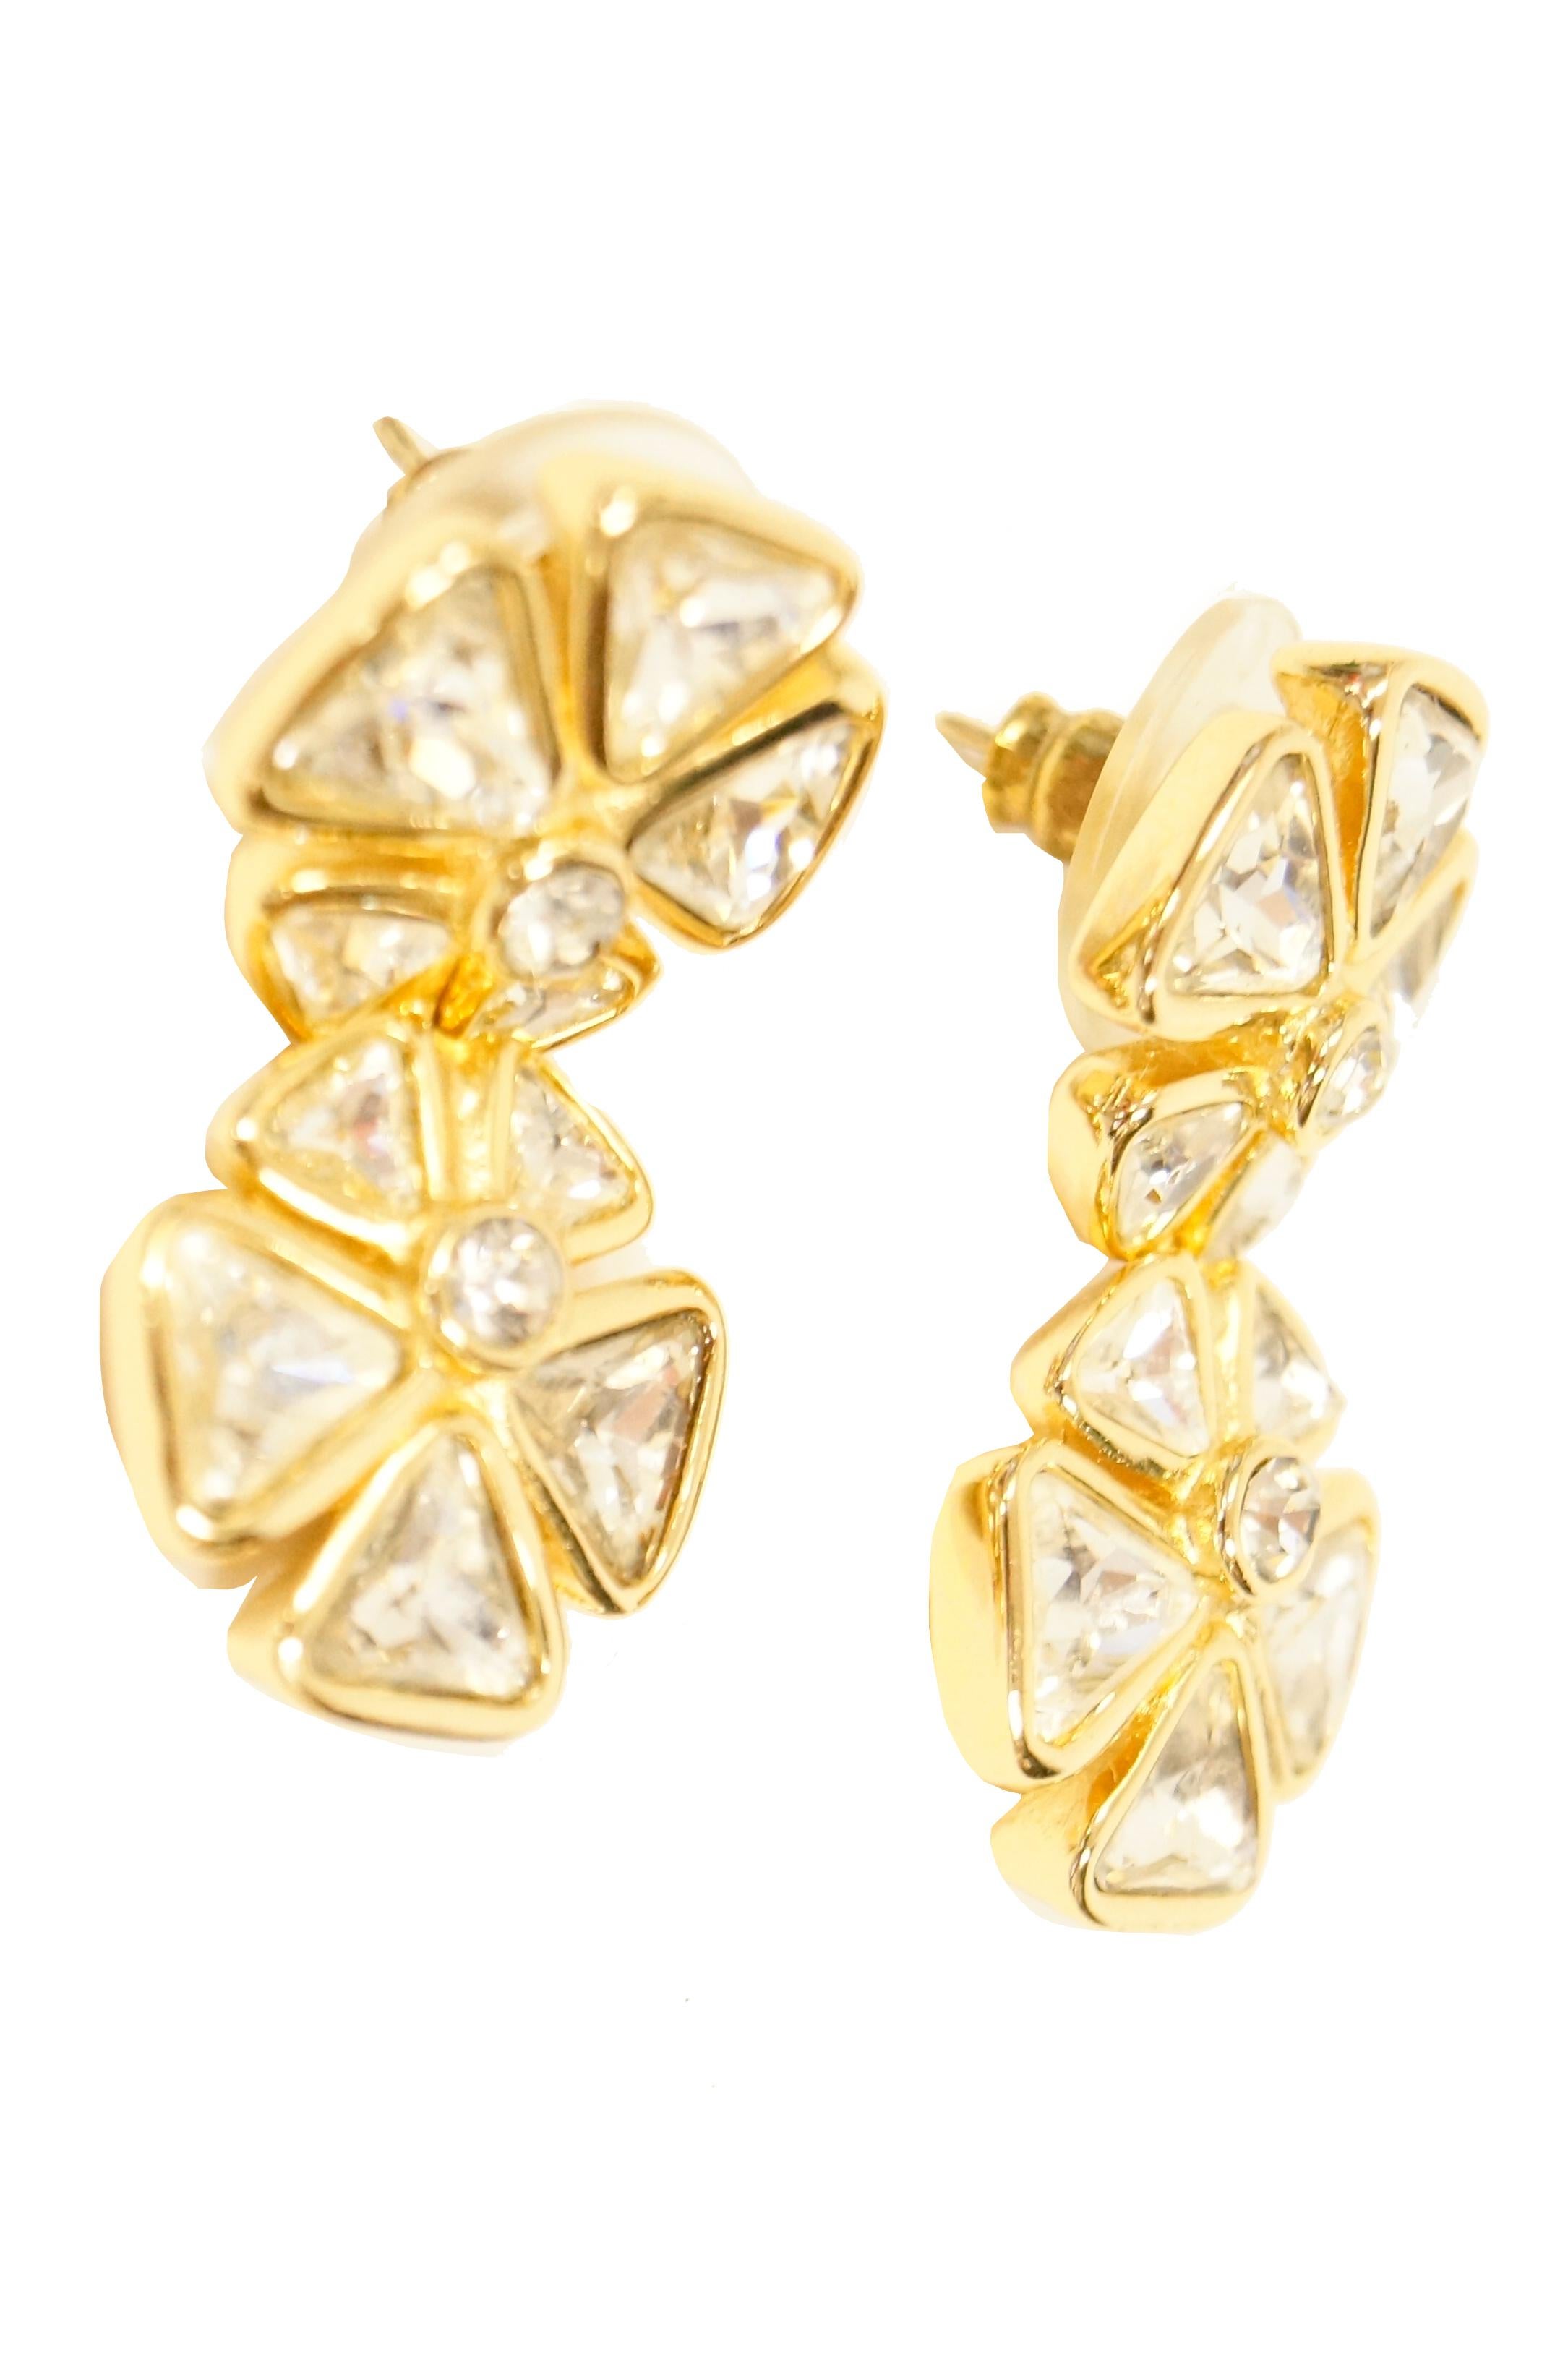 Delightfully cheery rhinestone earrings by Dior! Each earring features two five - petal flowers consisting of triangular rhinestones in a vermeil yellow gold bevel setting with a multifaceted circular rhinestone center. The flowers are identical,